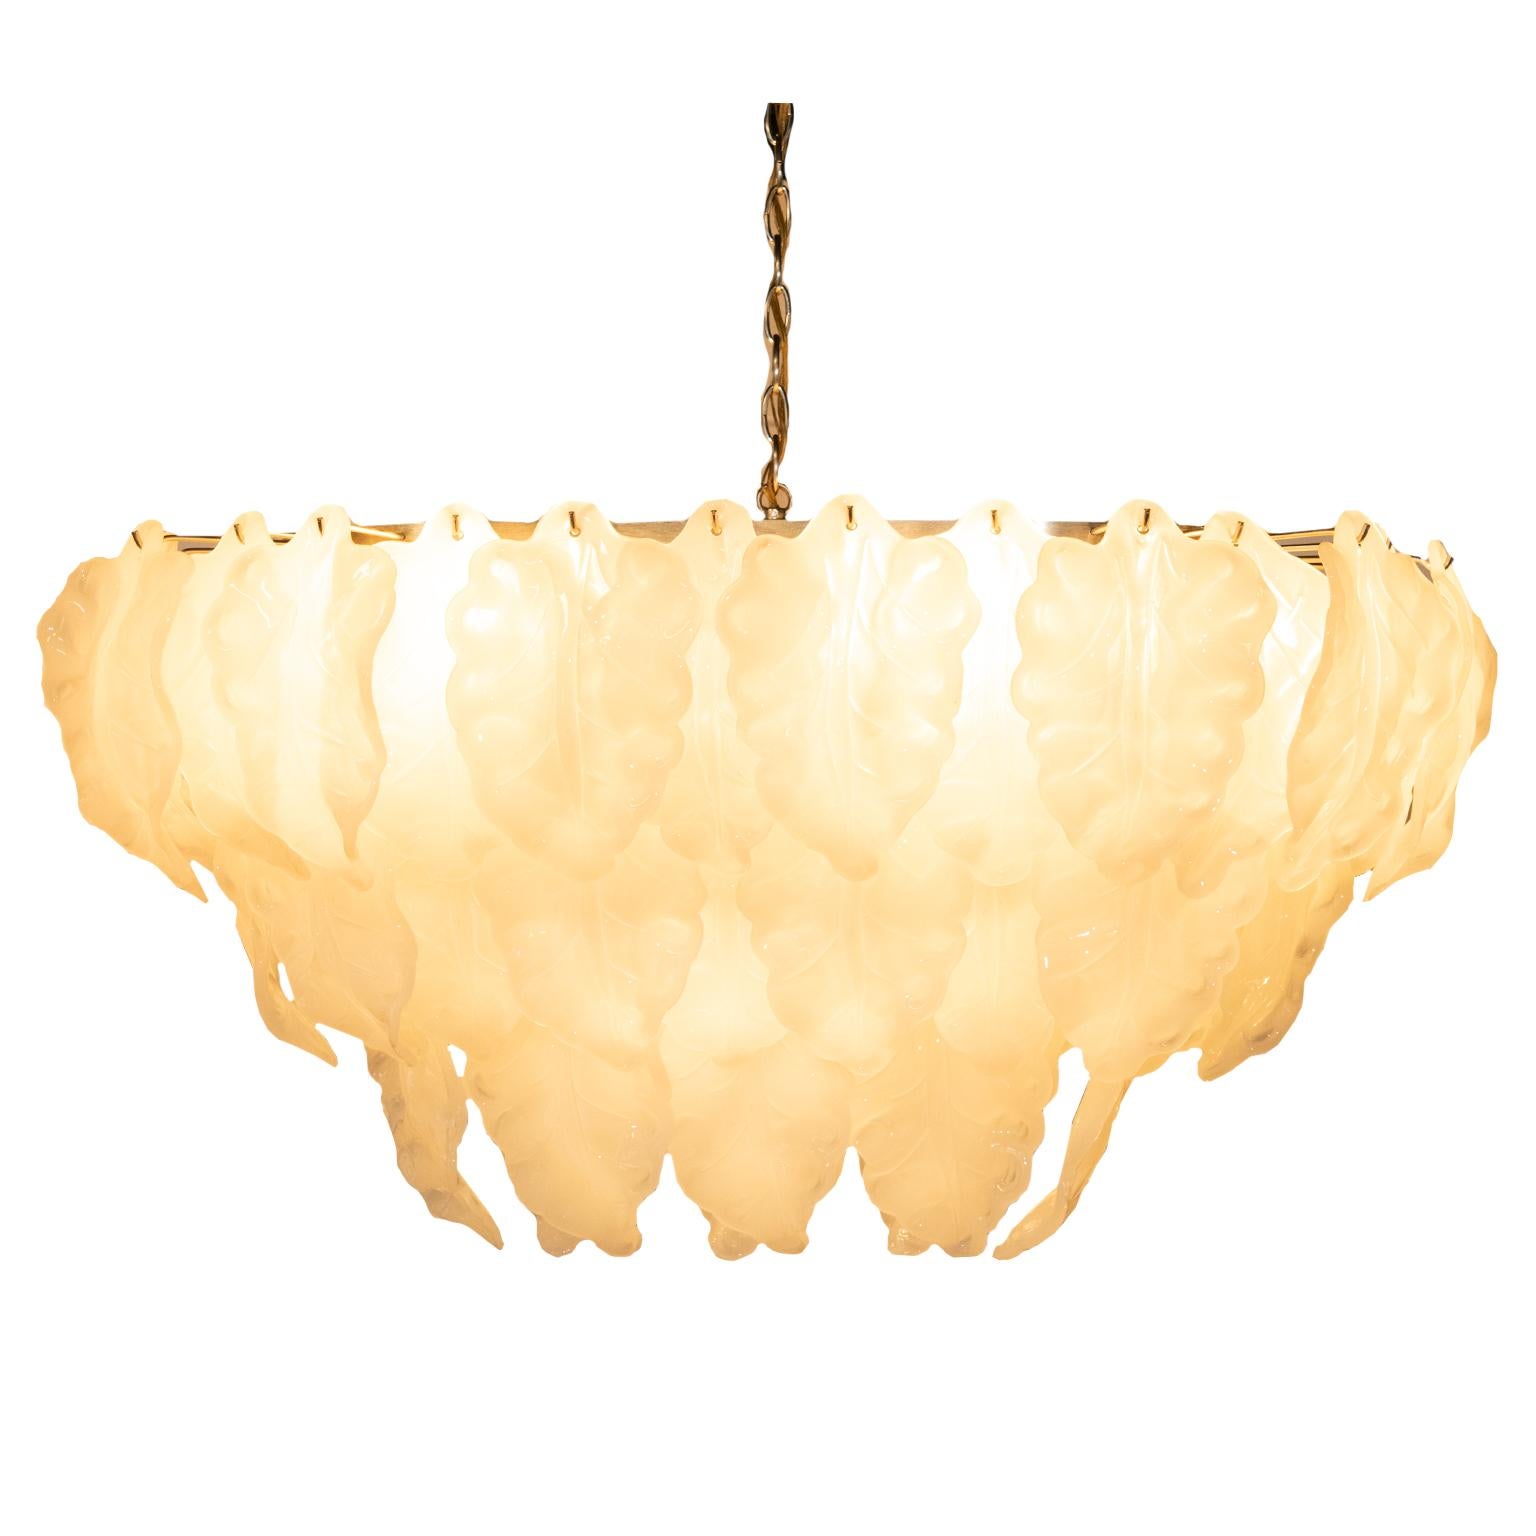 This is a large and impressive eight light Murano pendant with three tiers of
white opaque glass 